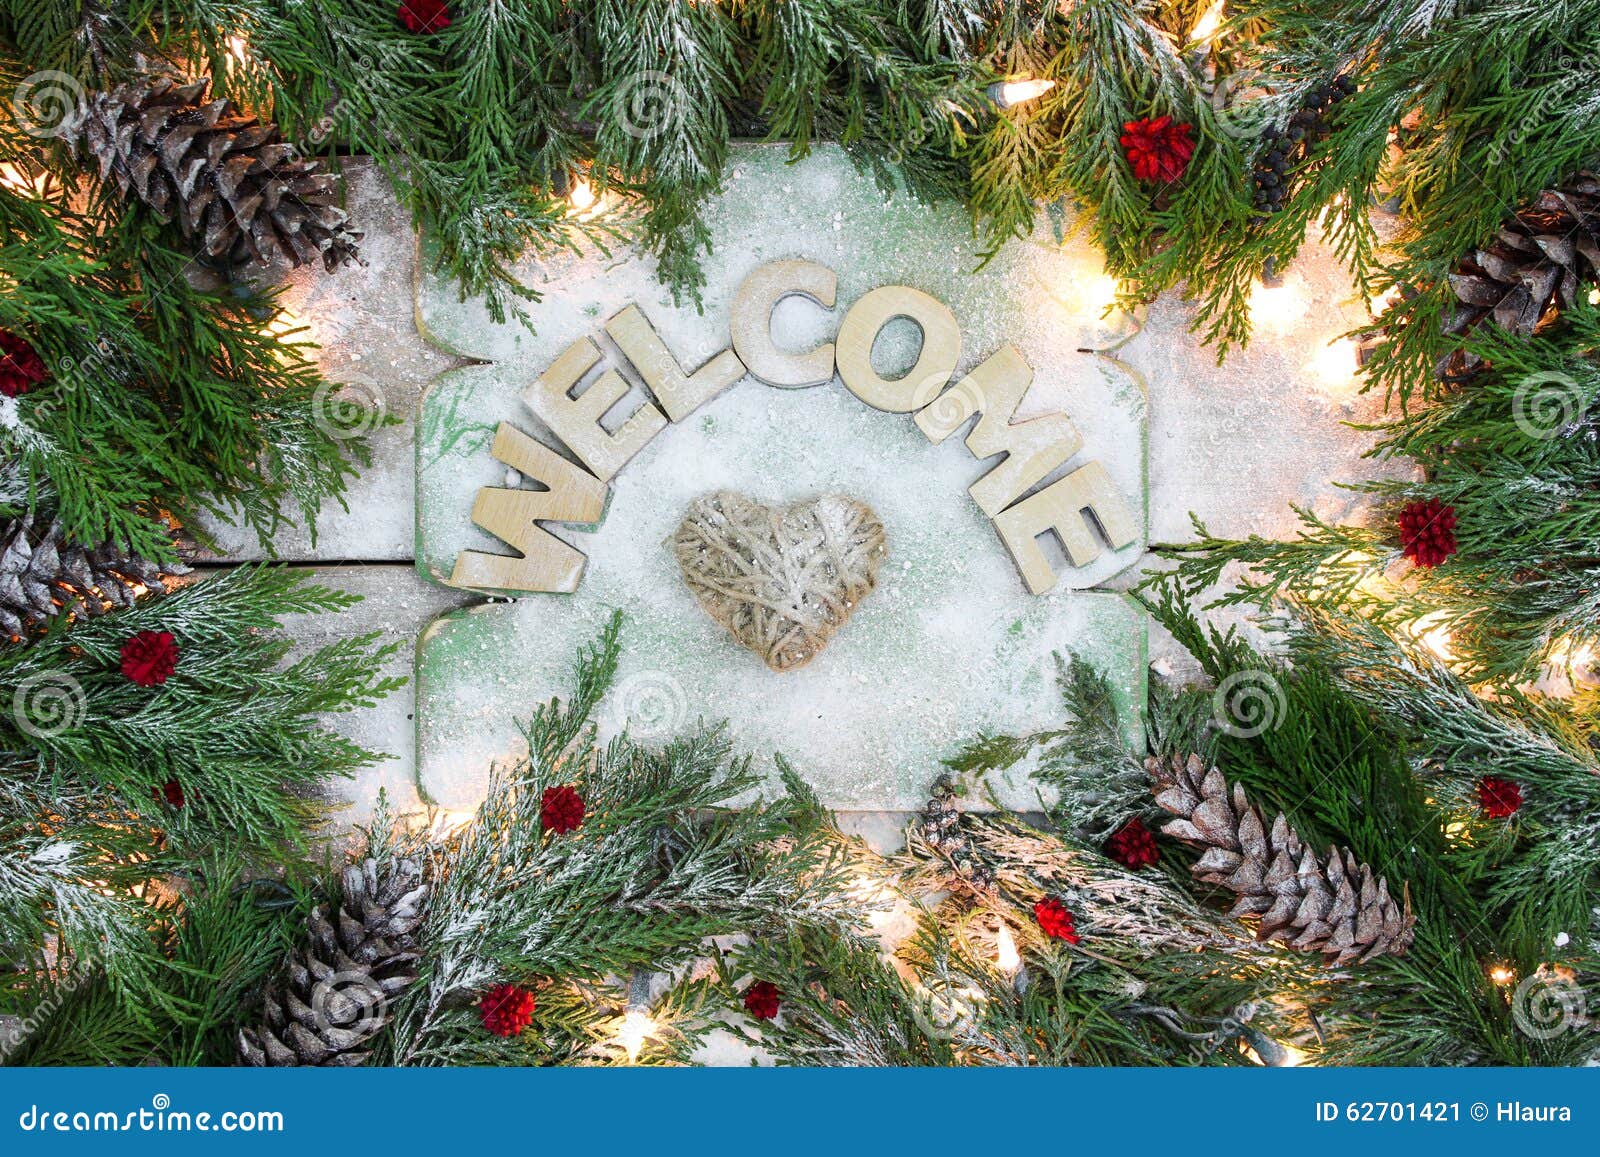 Holiday Welcome Sign Stock Photo - Image: 62701421